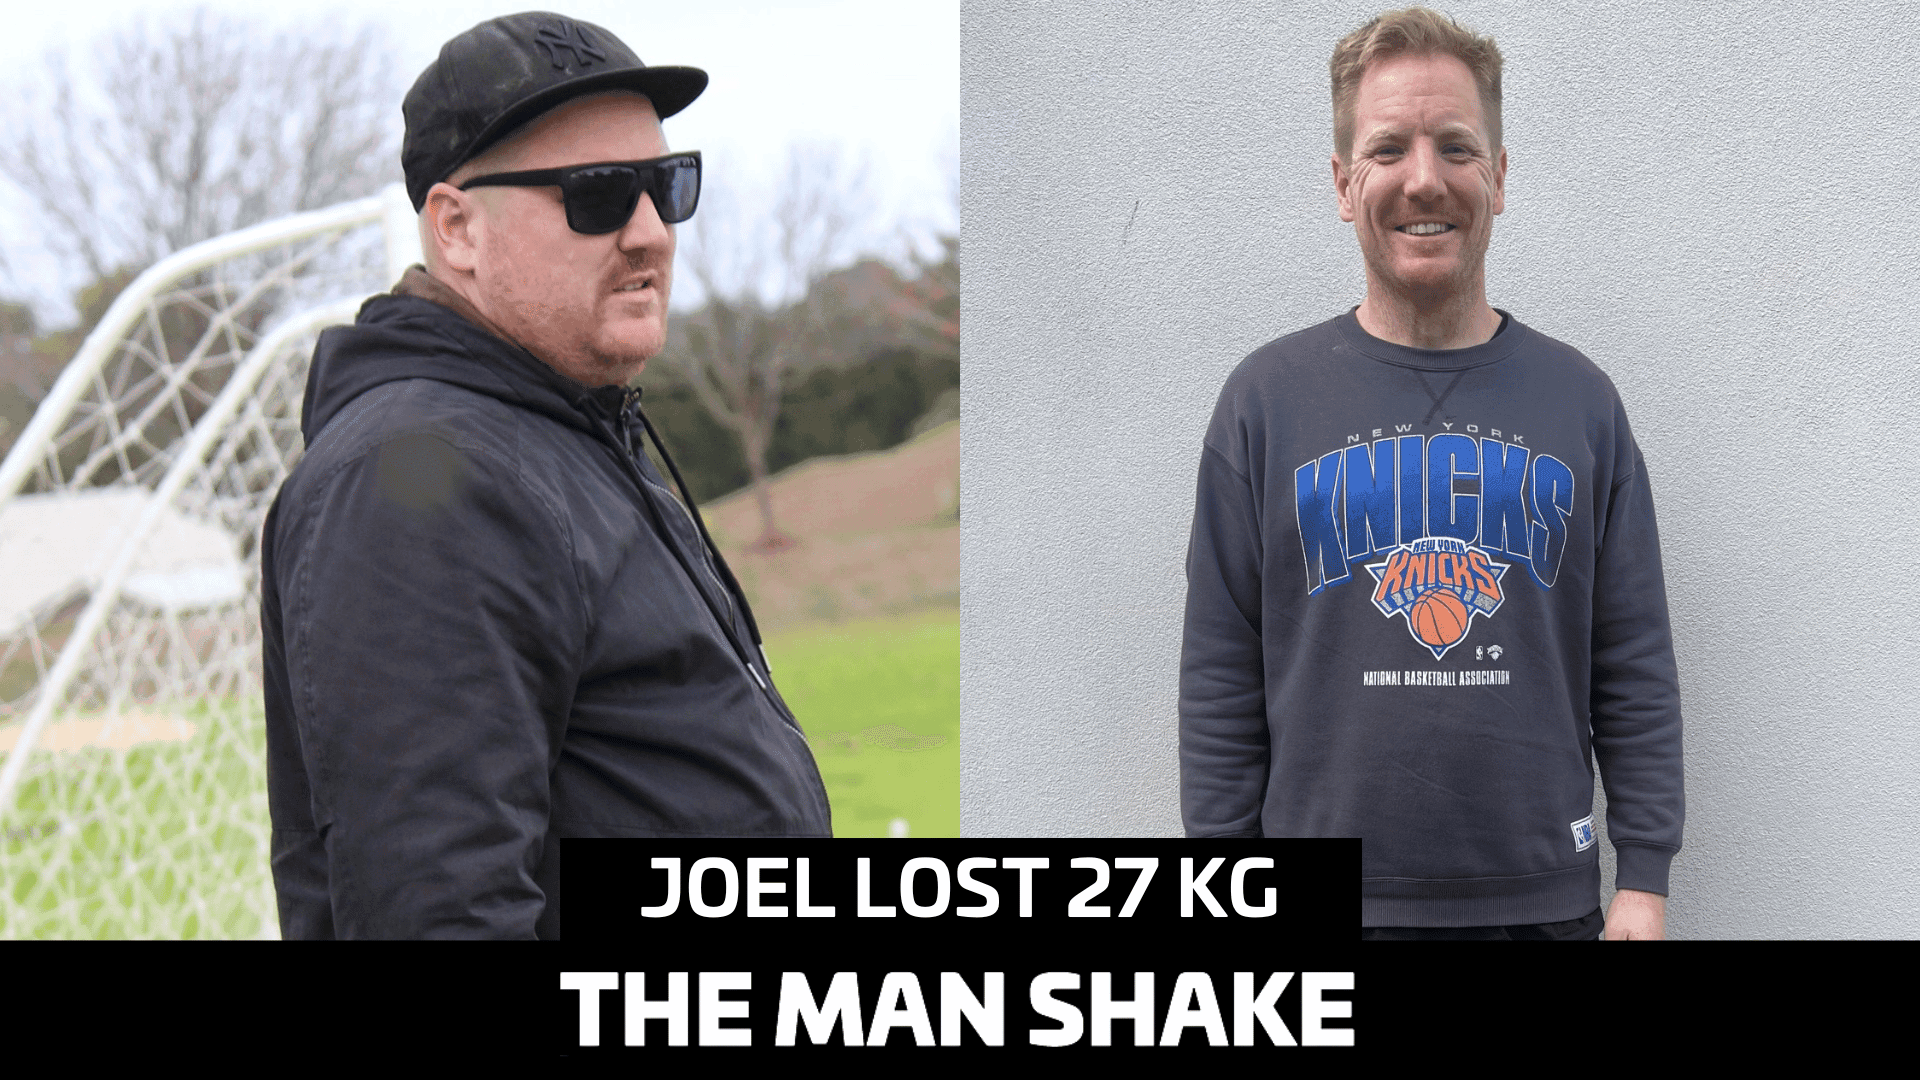 Joel wanted to be around long term so he lost 27kg!